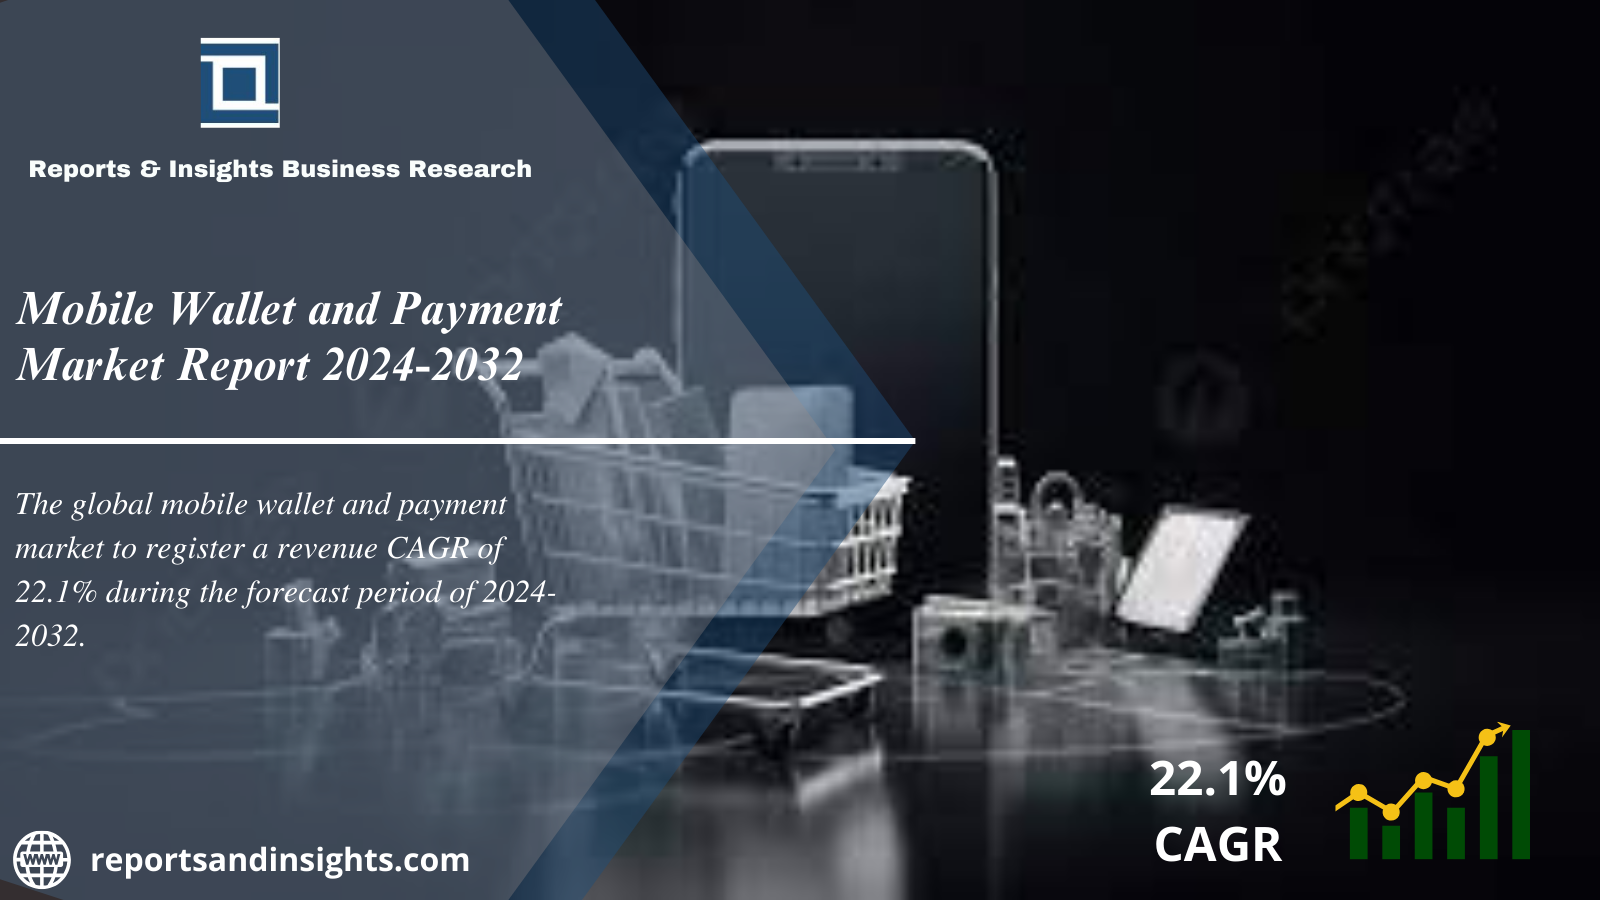 Mobile Wallet and Payment Market Research Report 2024 to 2032: Size, Share, Trends, Growth and Forecast